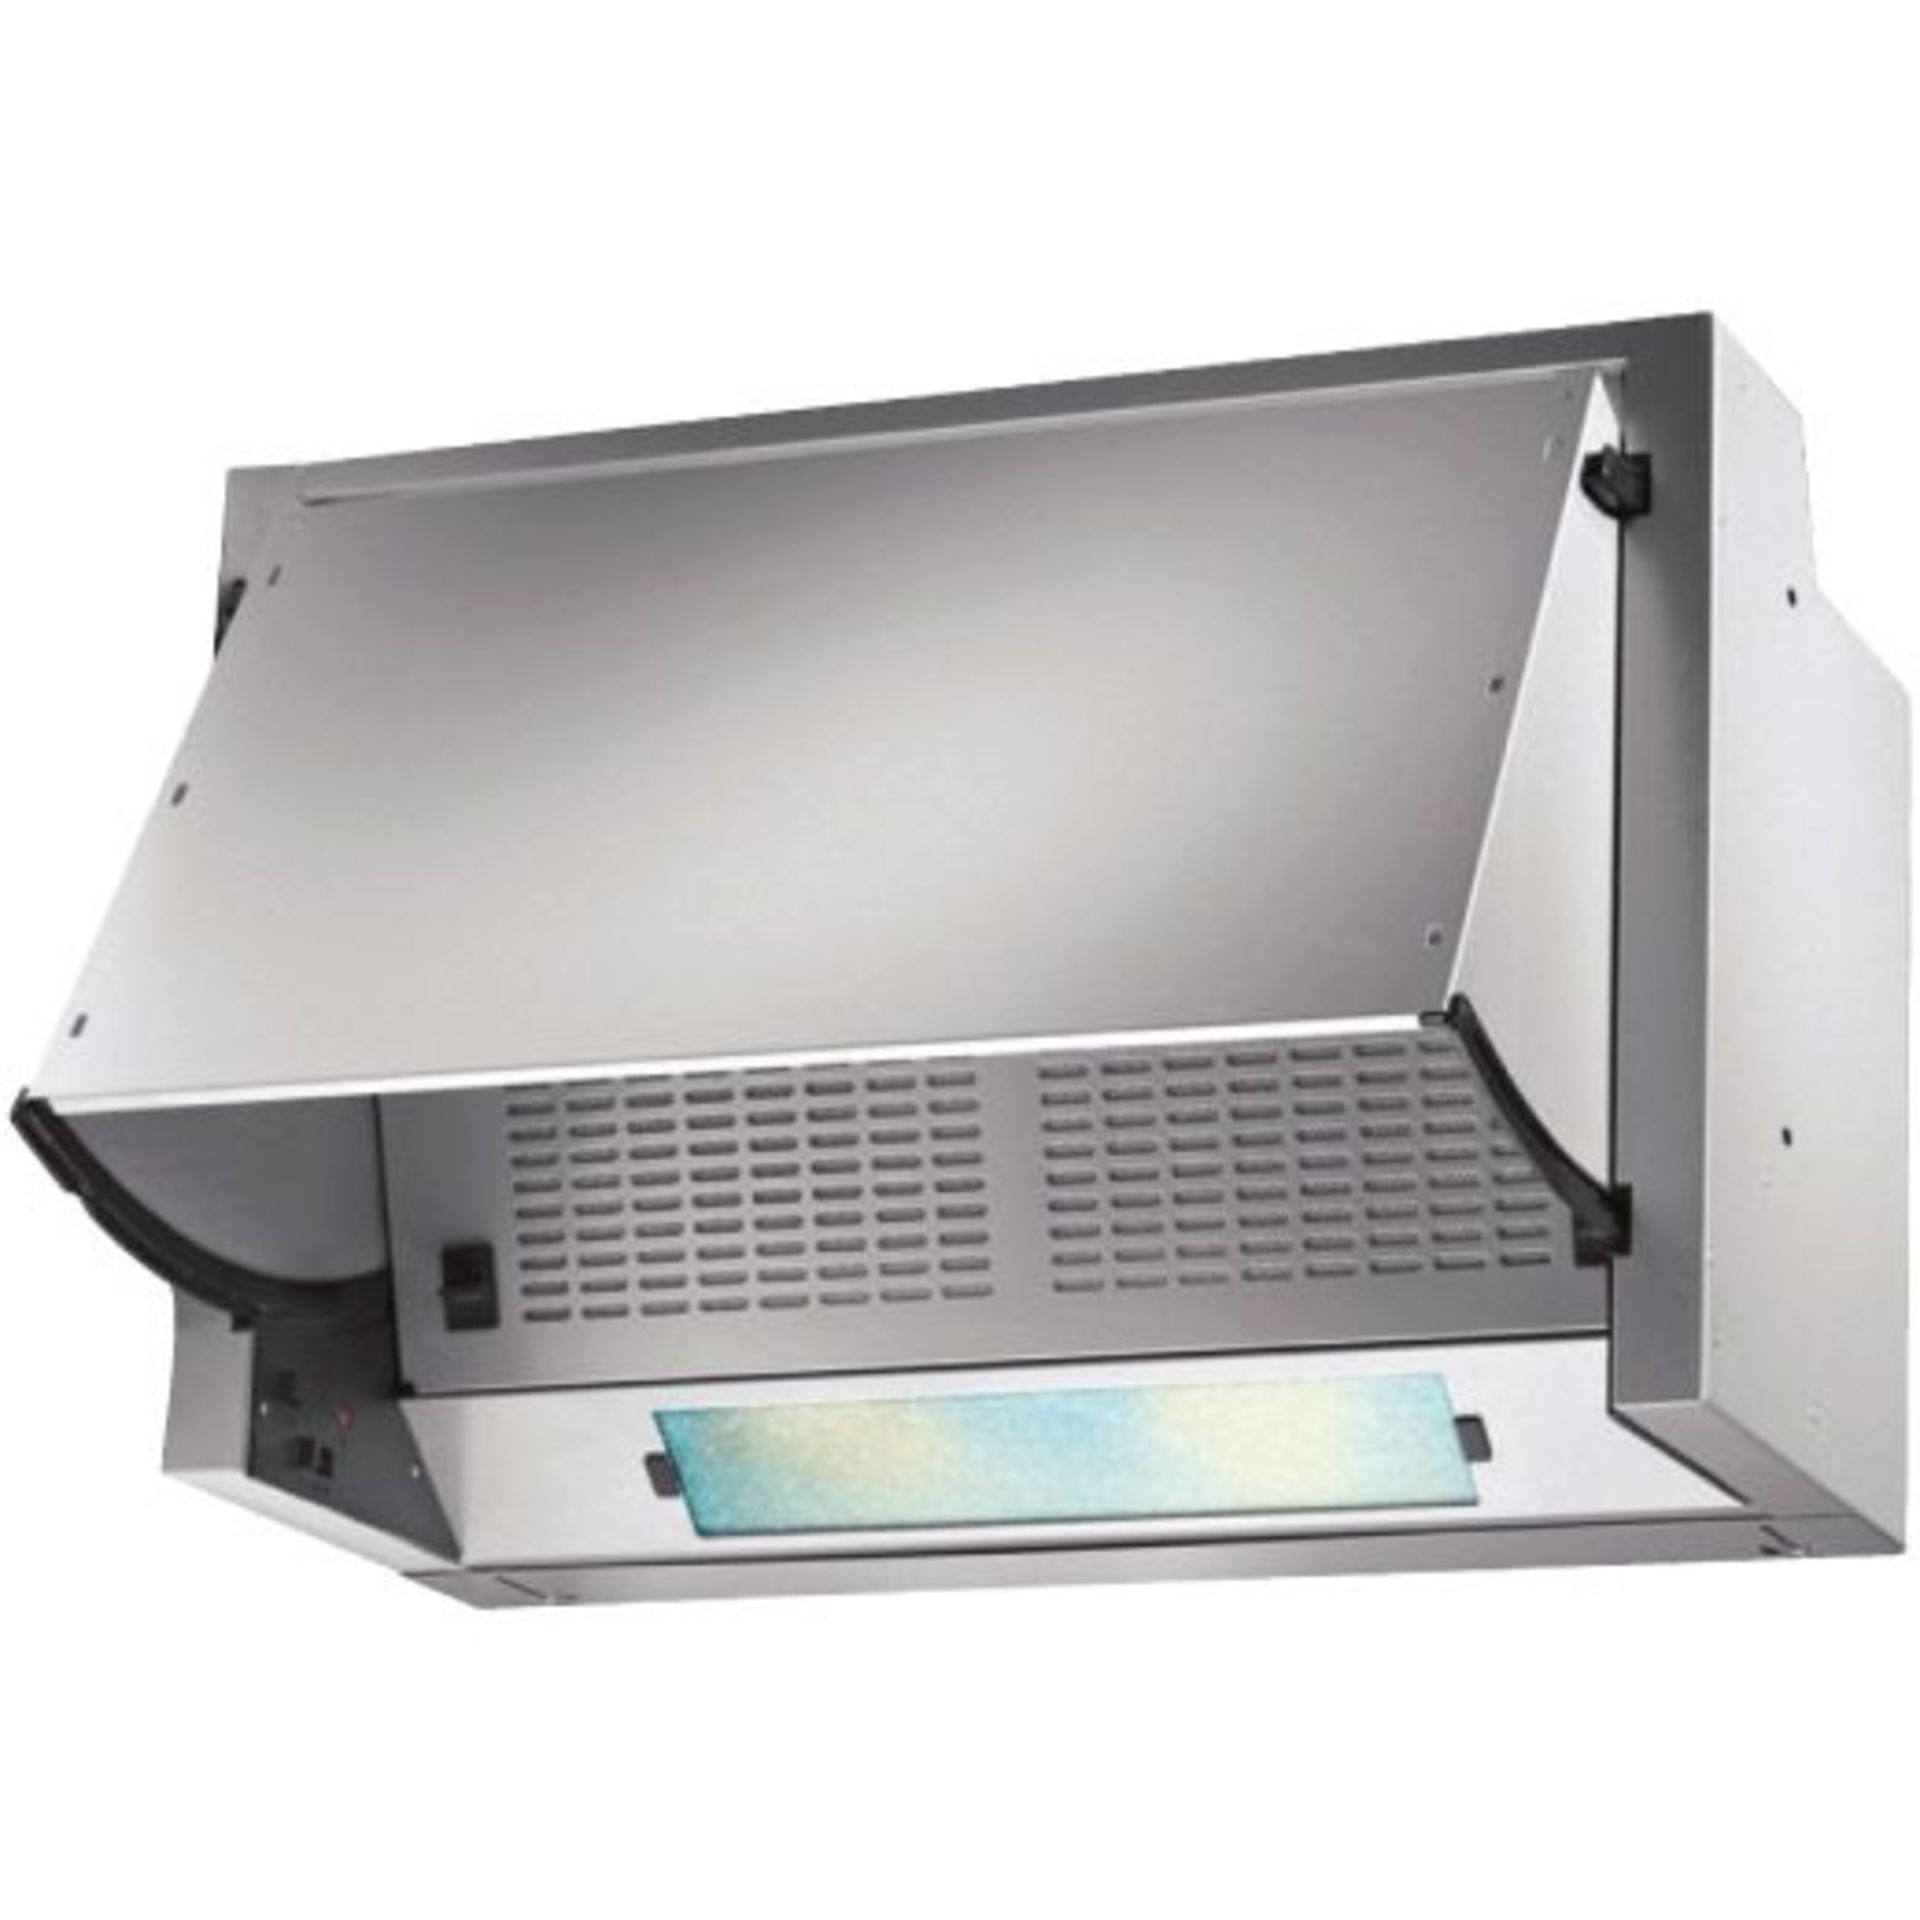 (AG37) New Prima Grey Integrated Cooker Hood - PRCH550. RRP £119.99.